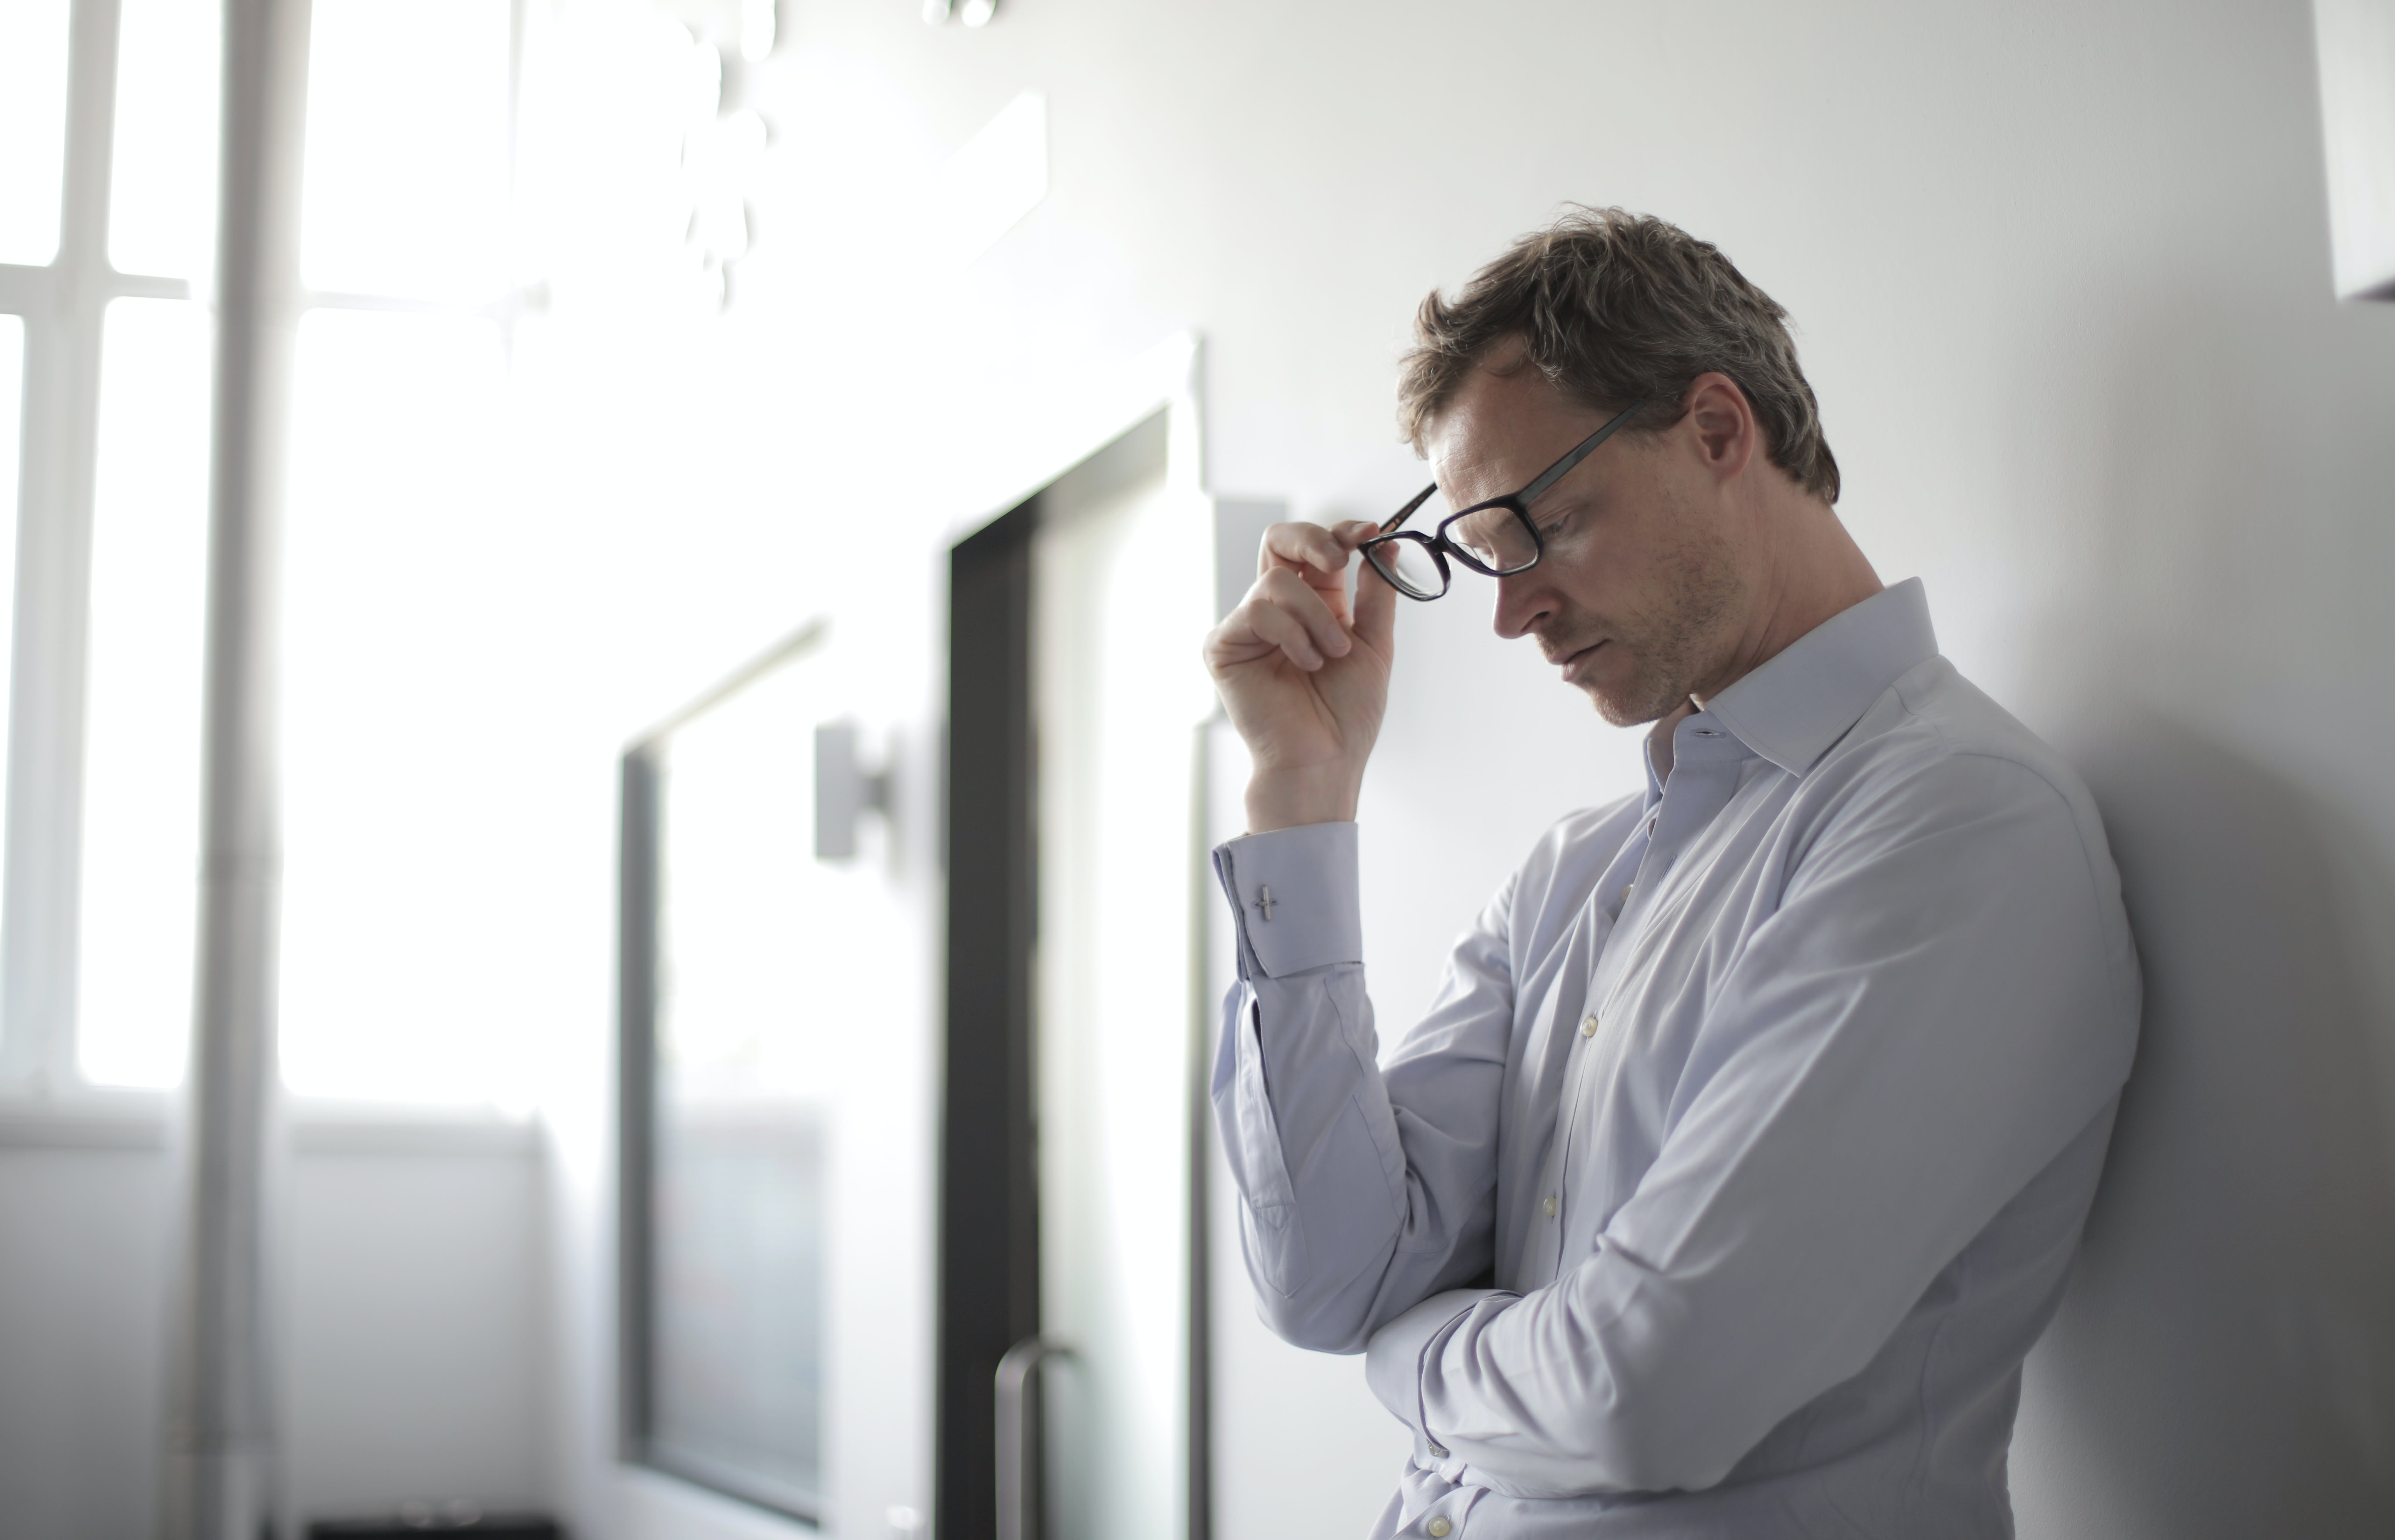 An upset man holding his glasses while standing against a wall | Source: Pexels